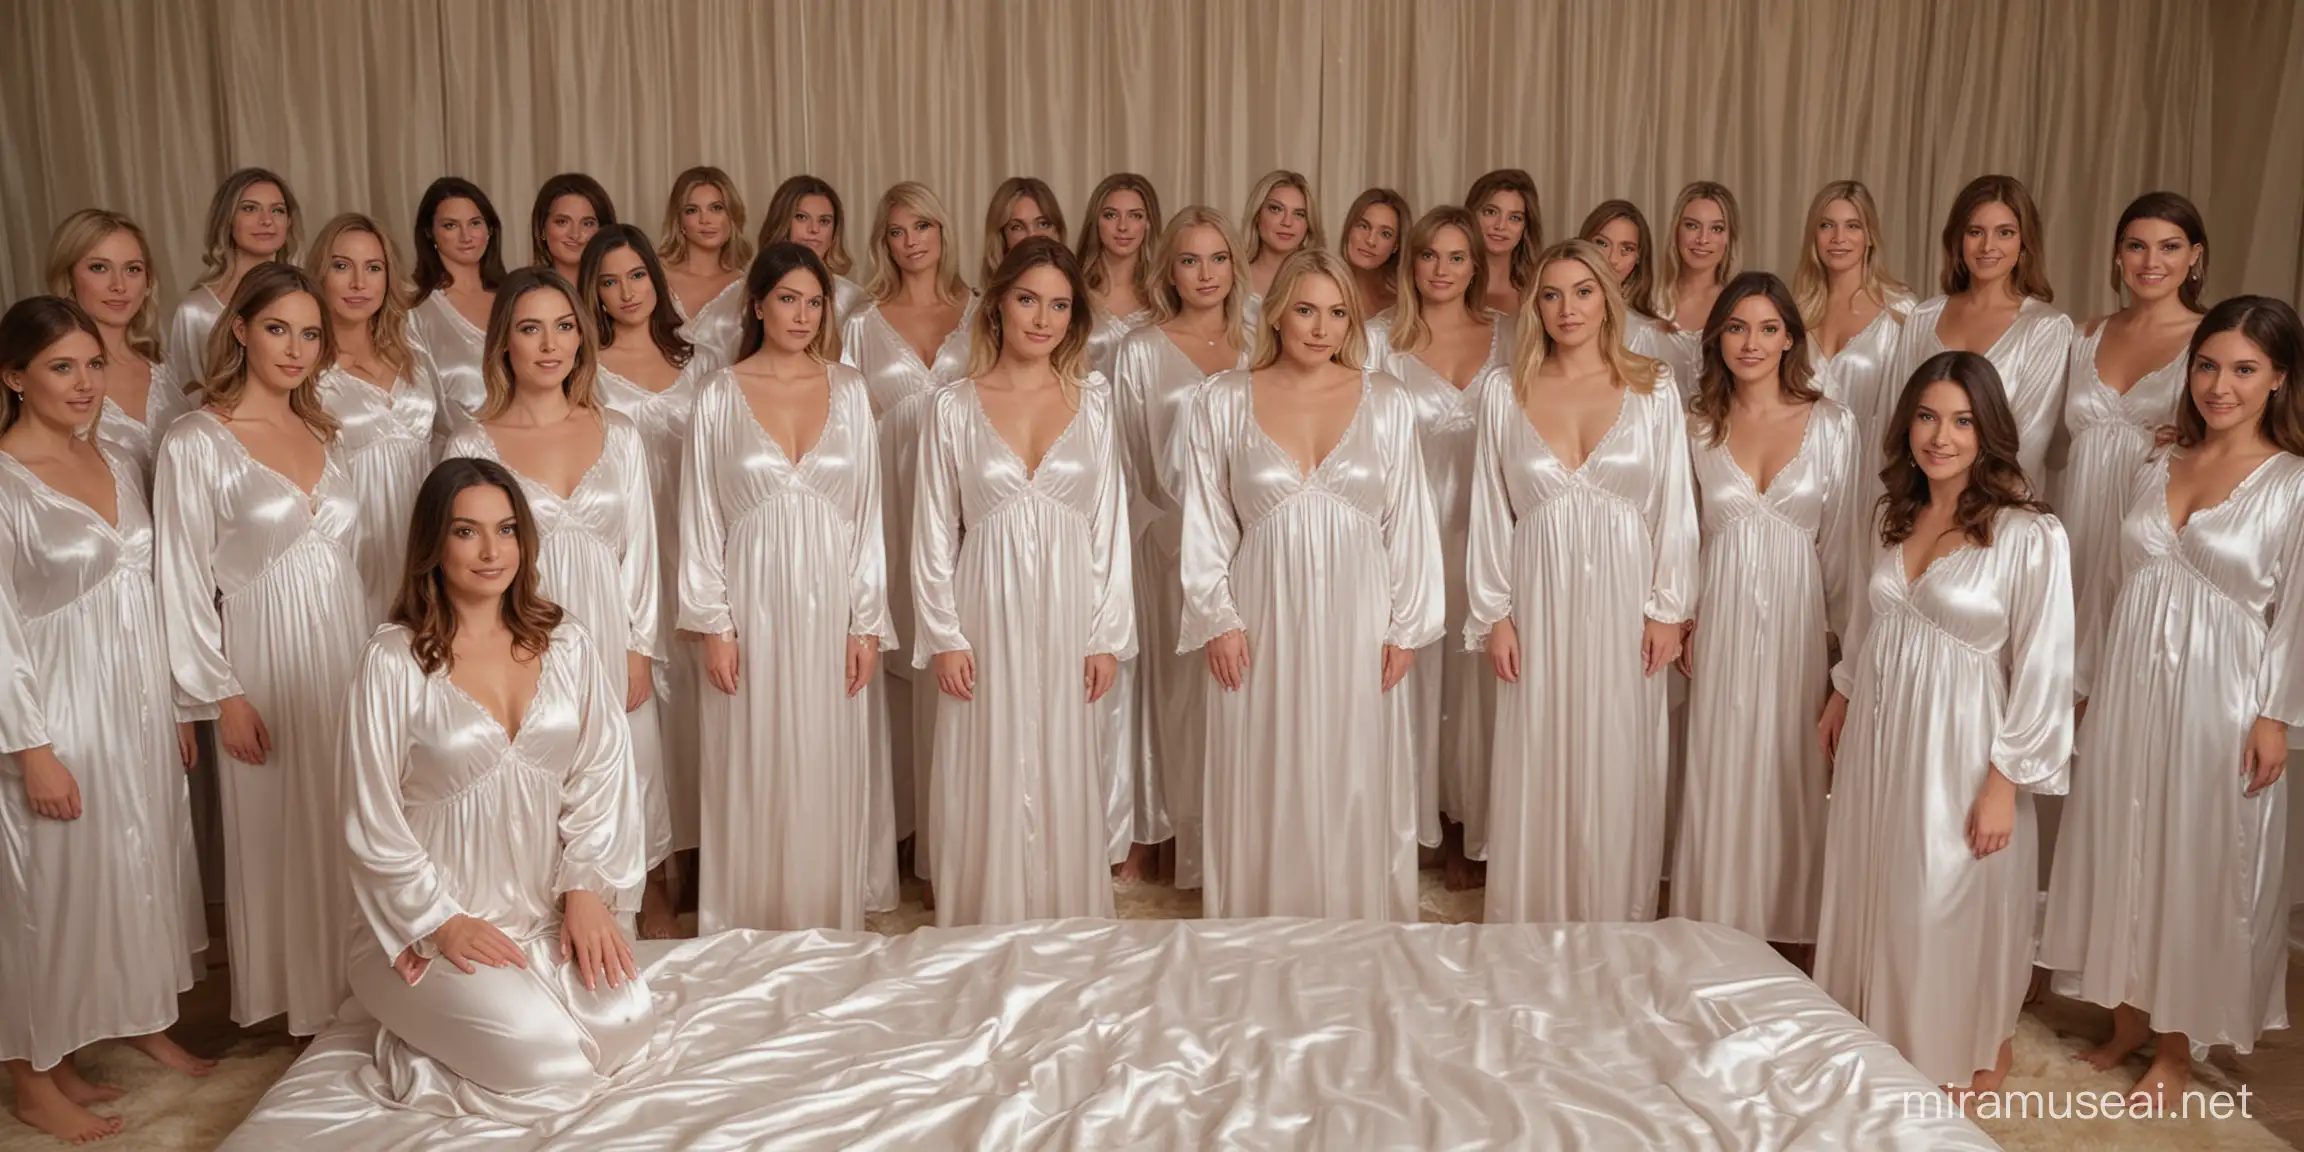 30 women in  milky satin nightgowns stand in 10 rows on a giant satin bed and look at you